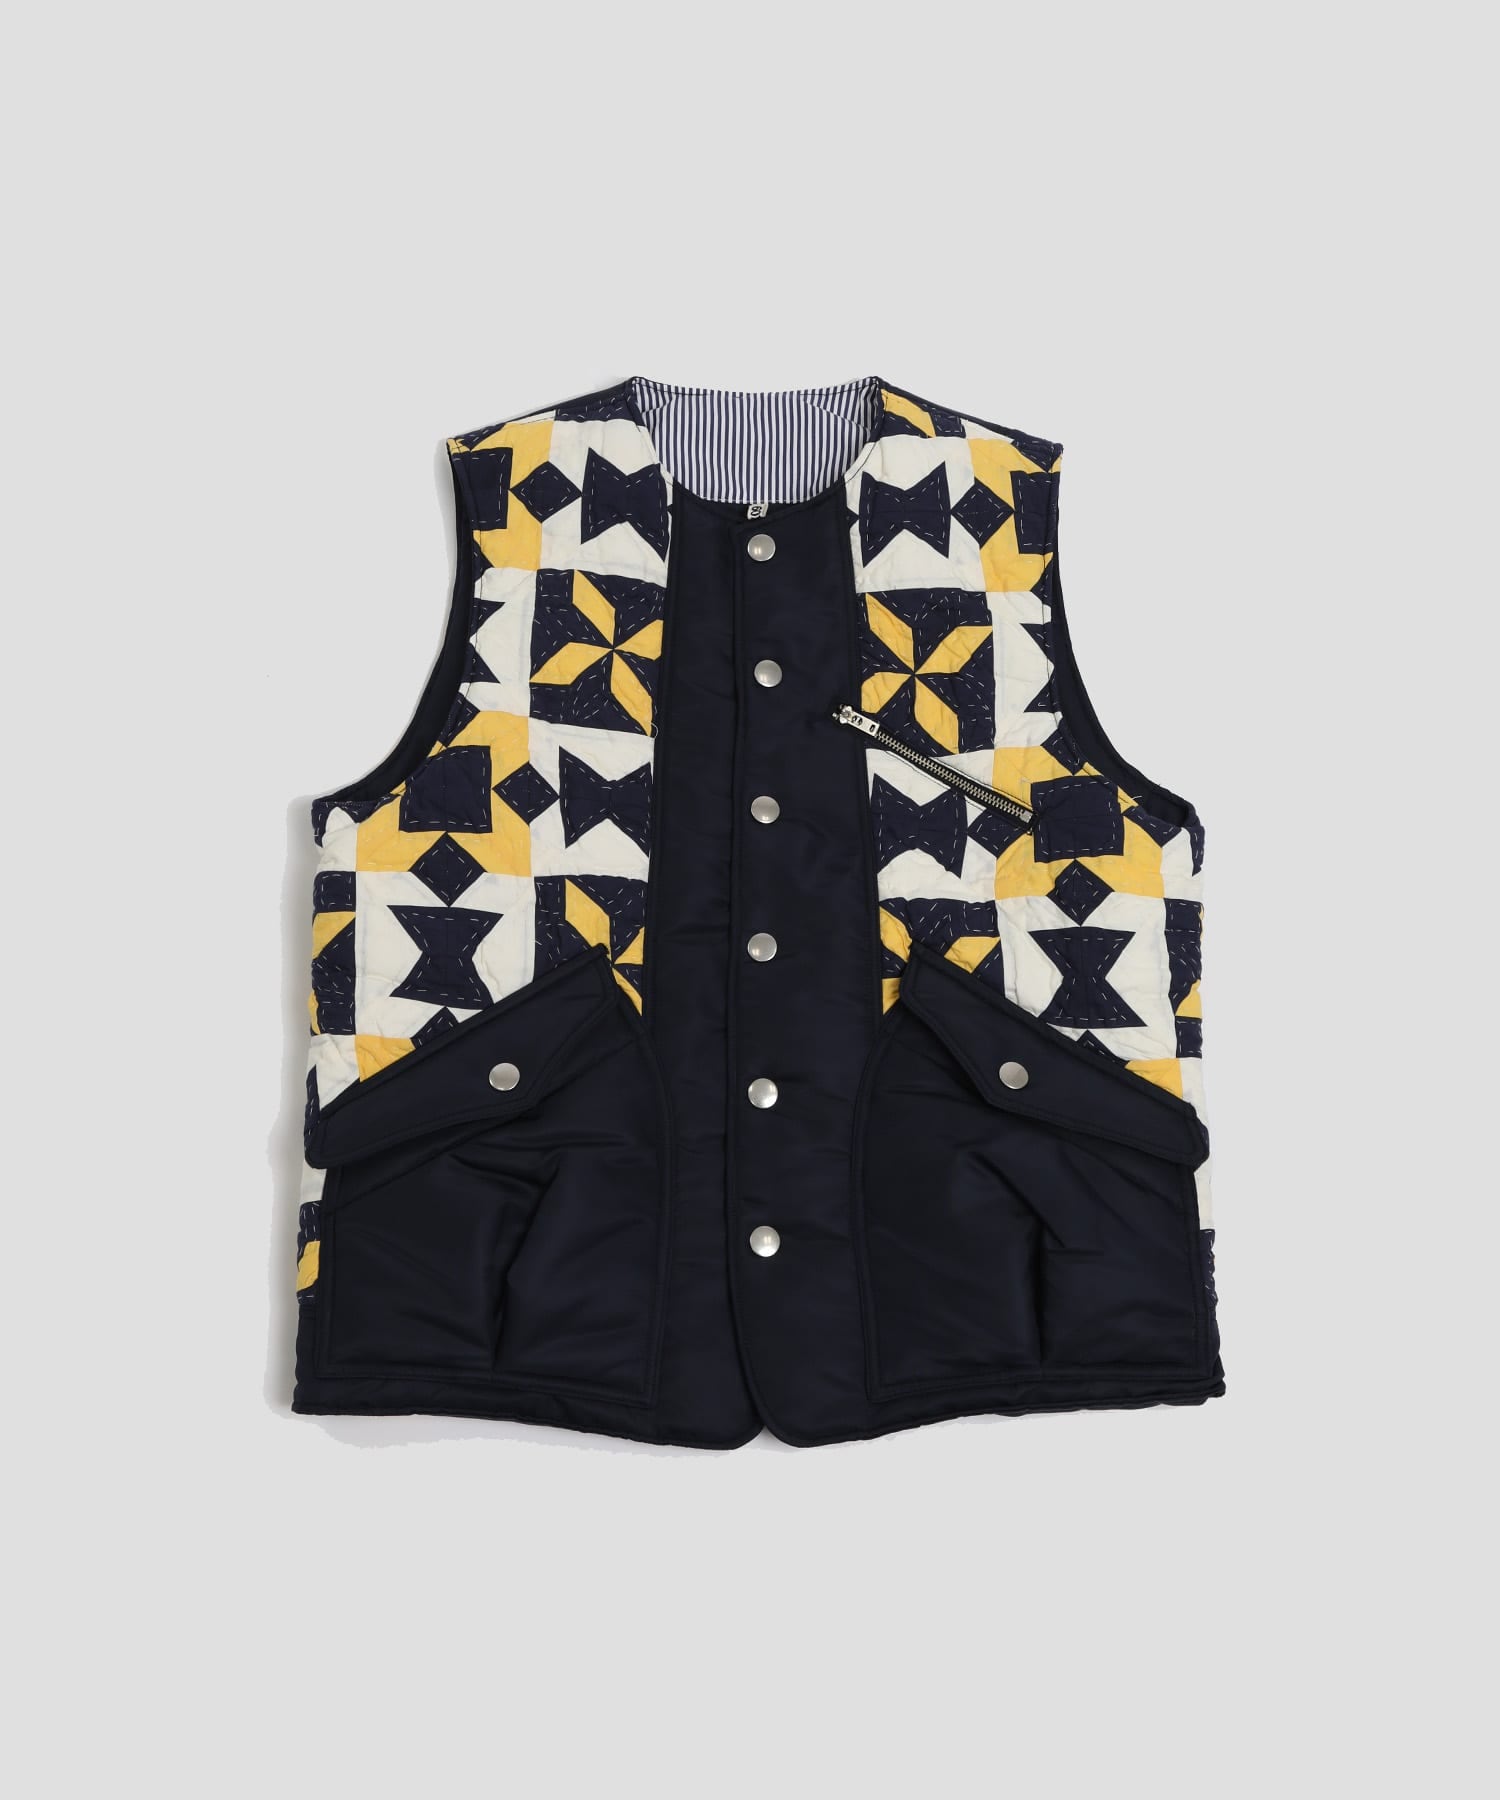 Hand patchwork quilted vest